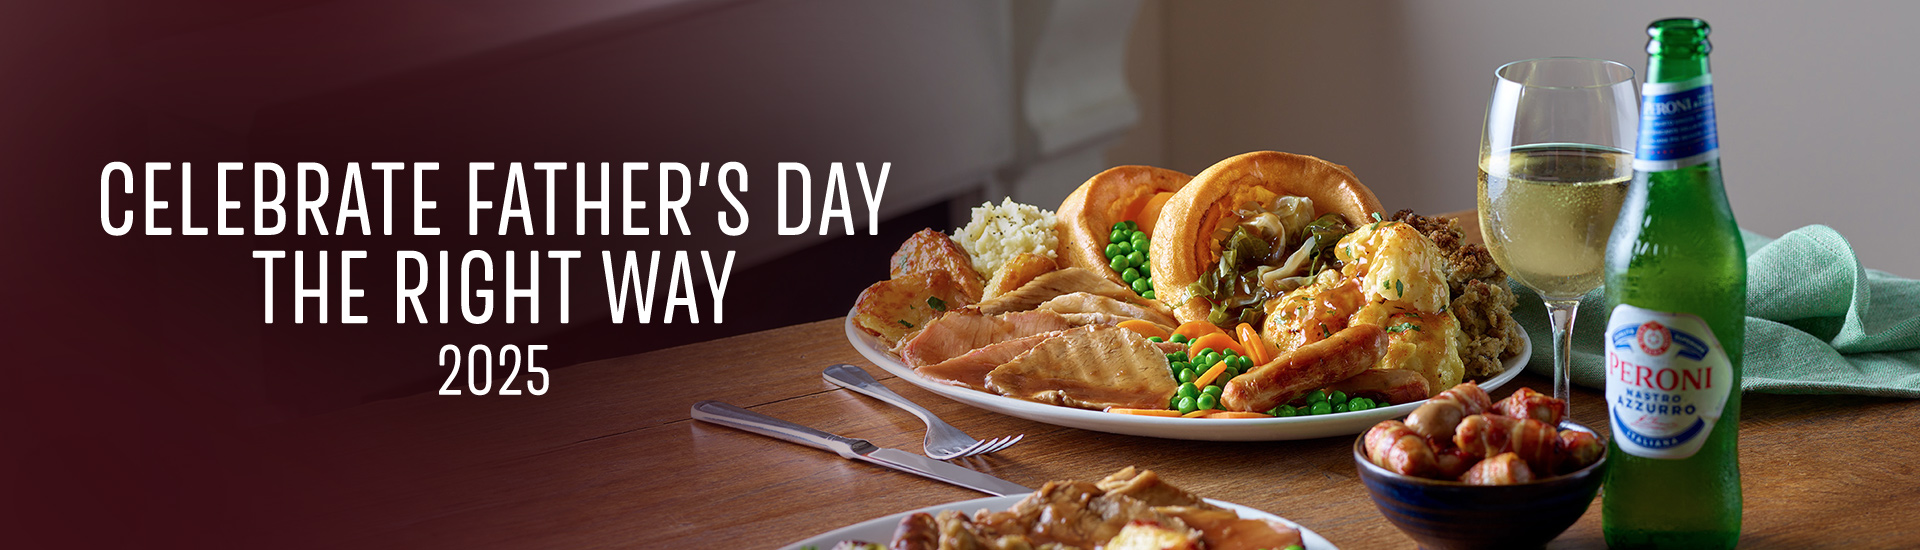 Father’s day carvery in Huddersfield